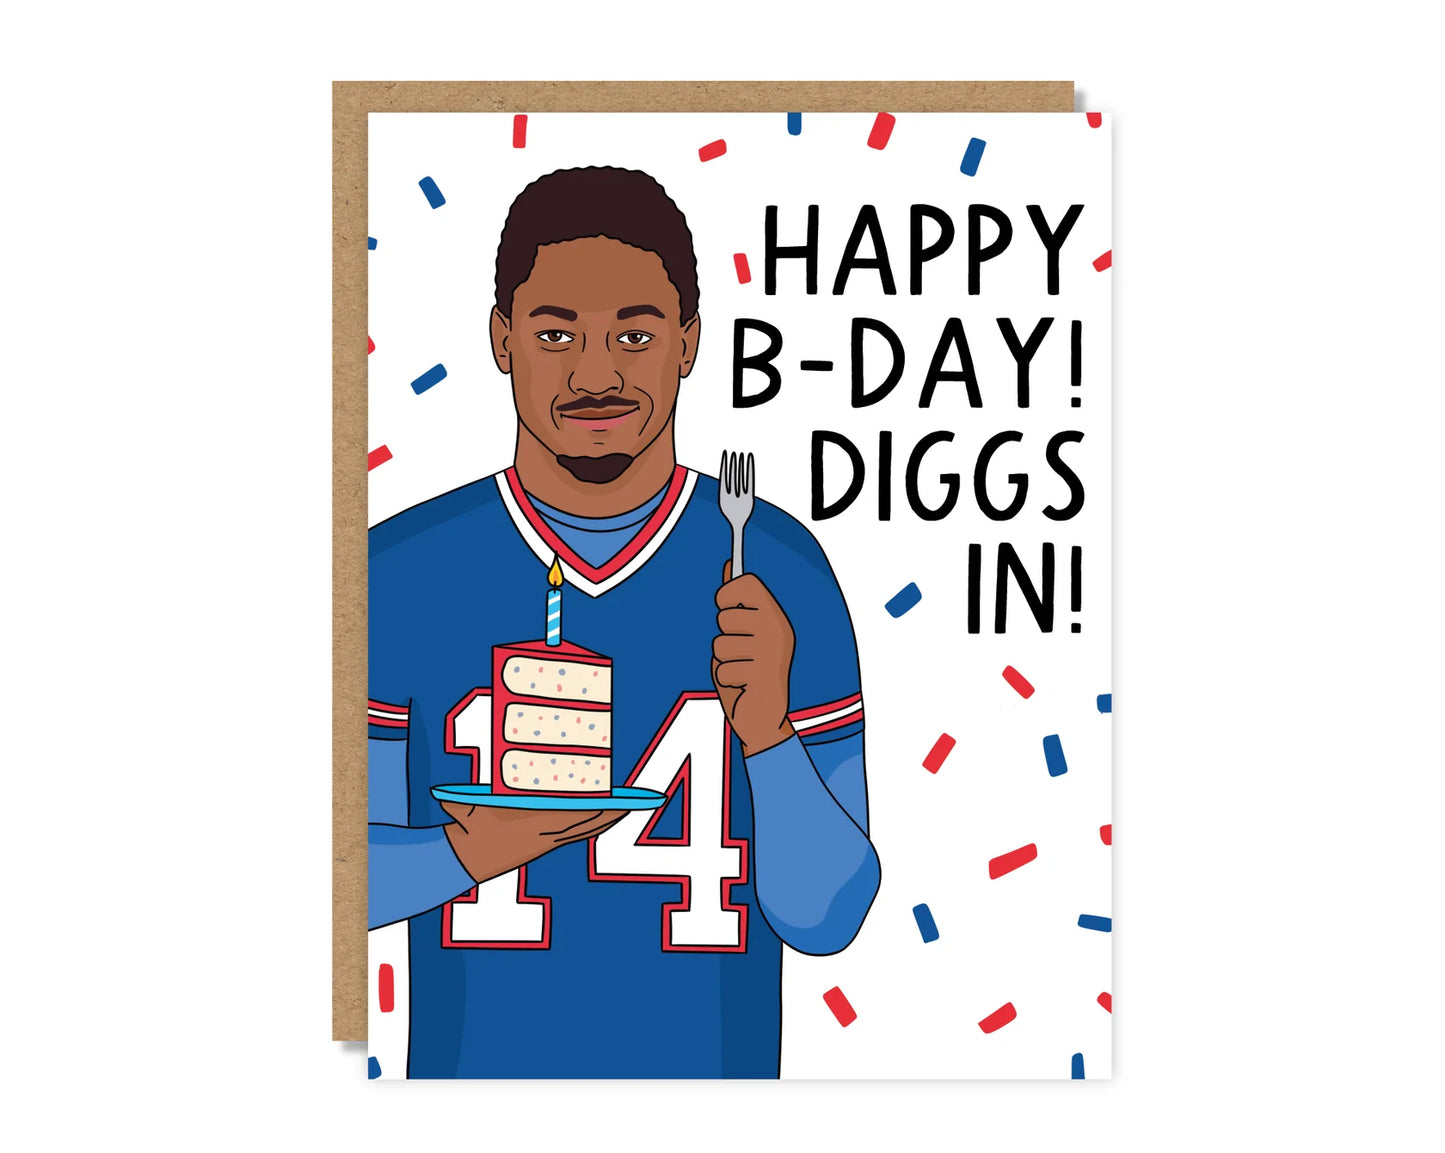 Happy B-Day! Diggs in!